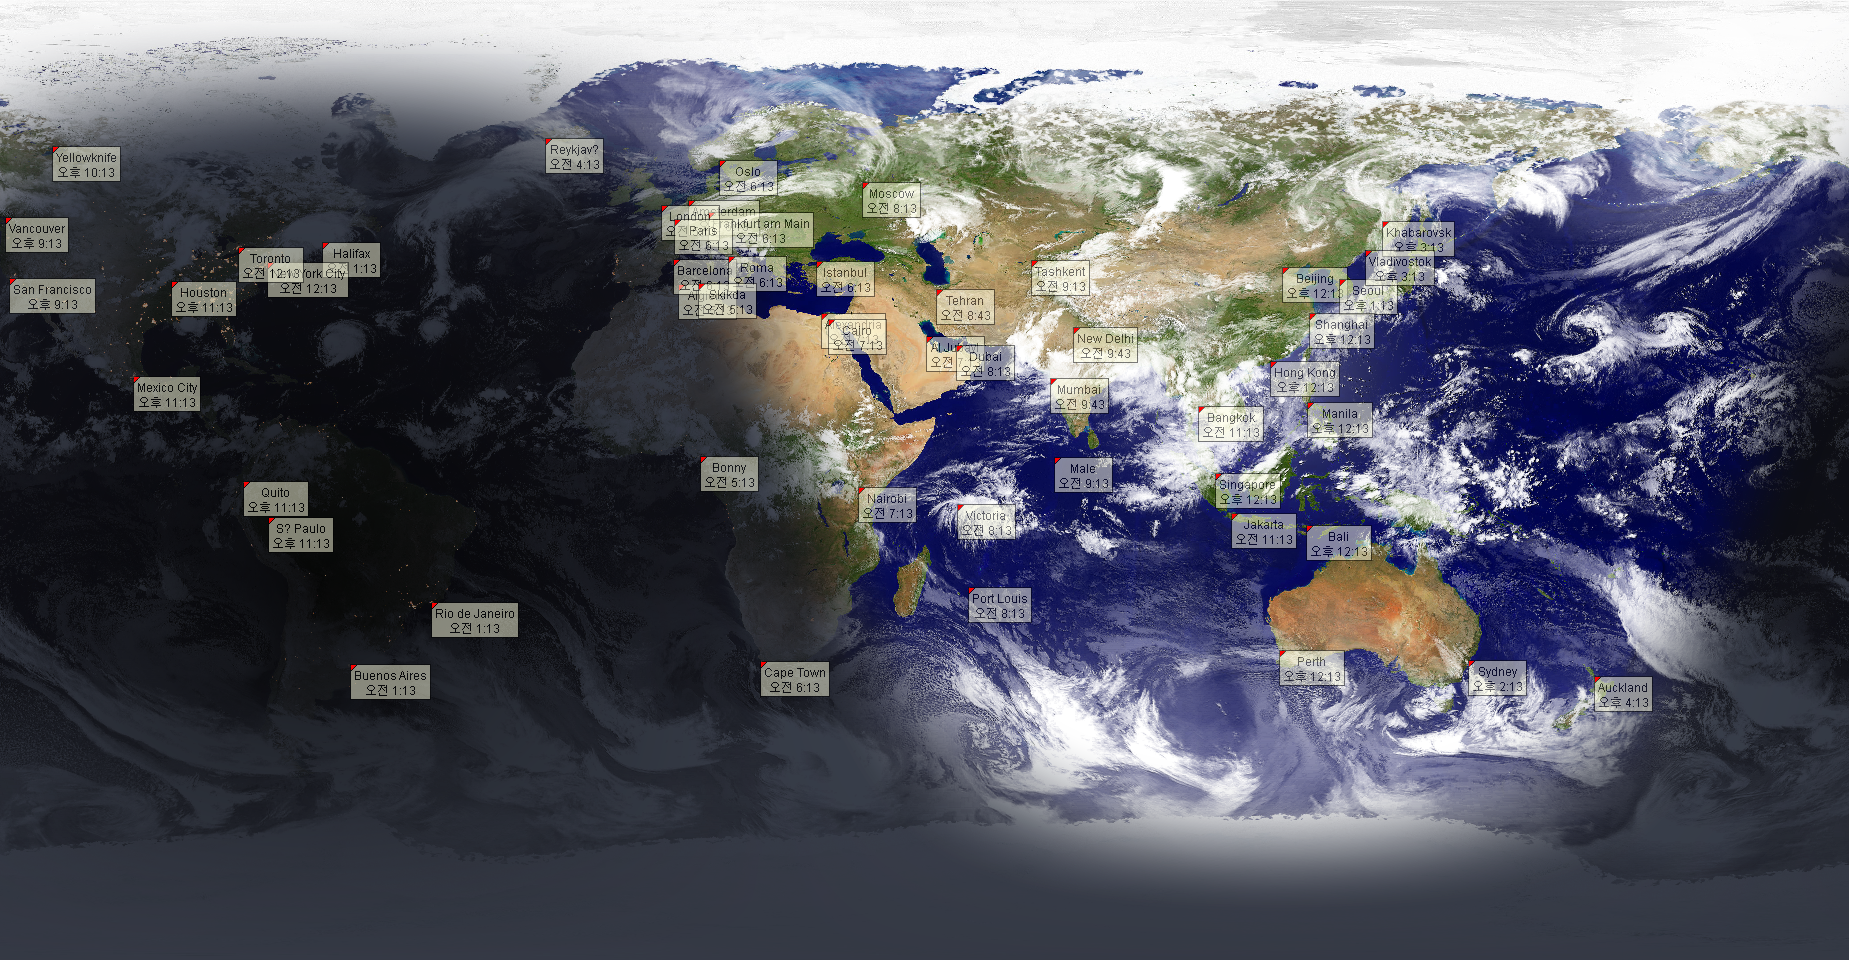 EarthView 7.7.5 for mac download